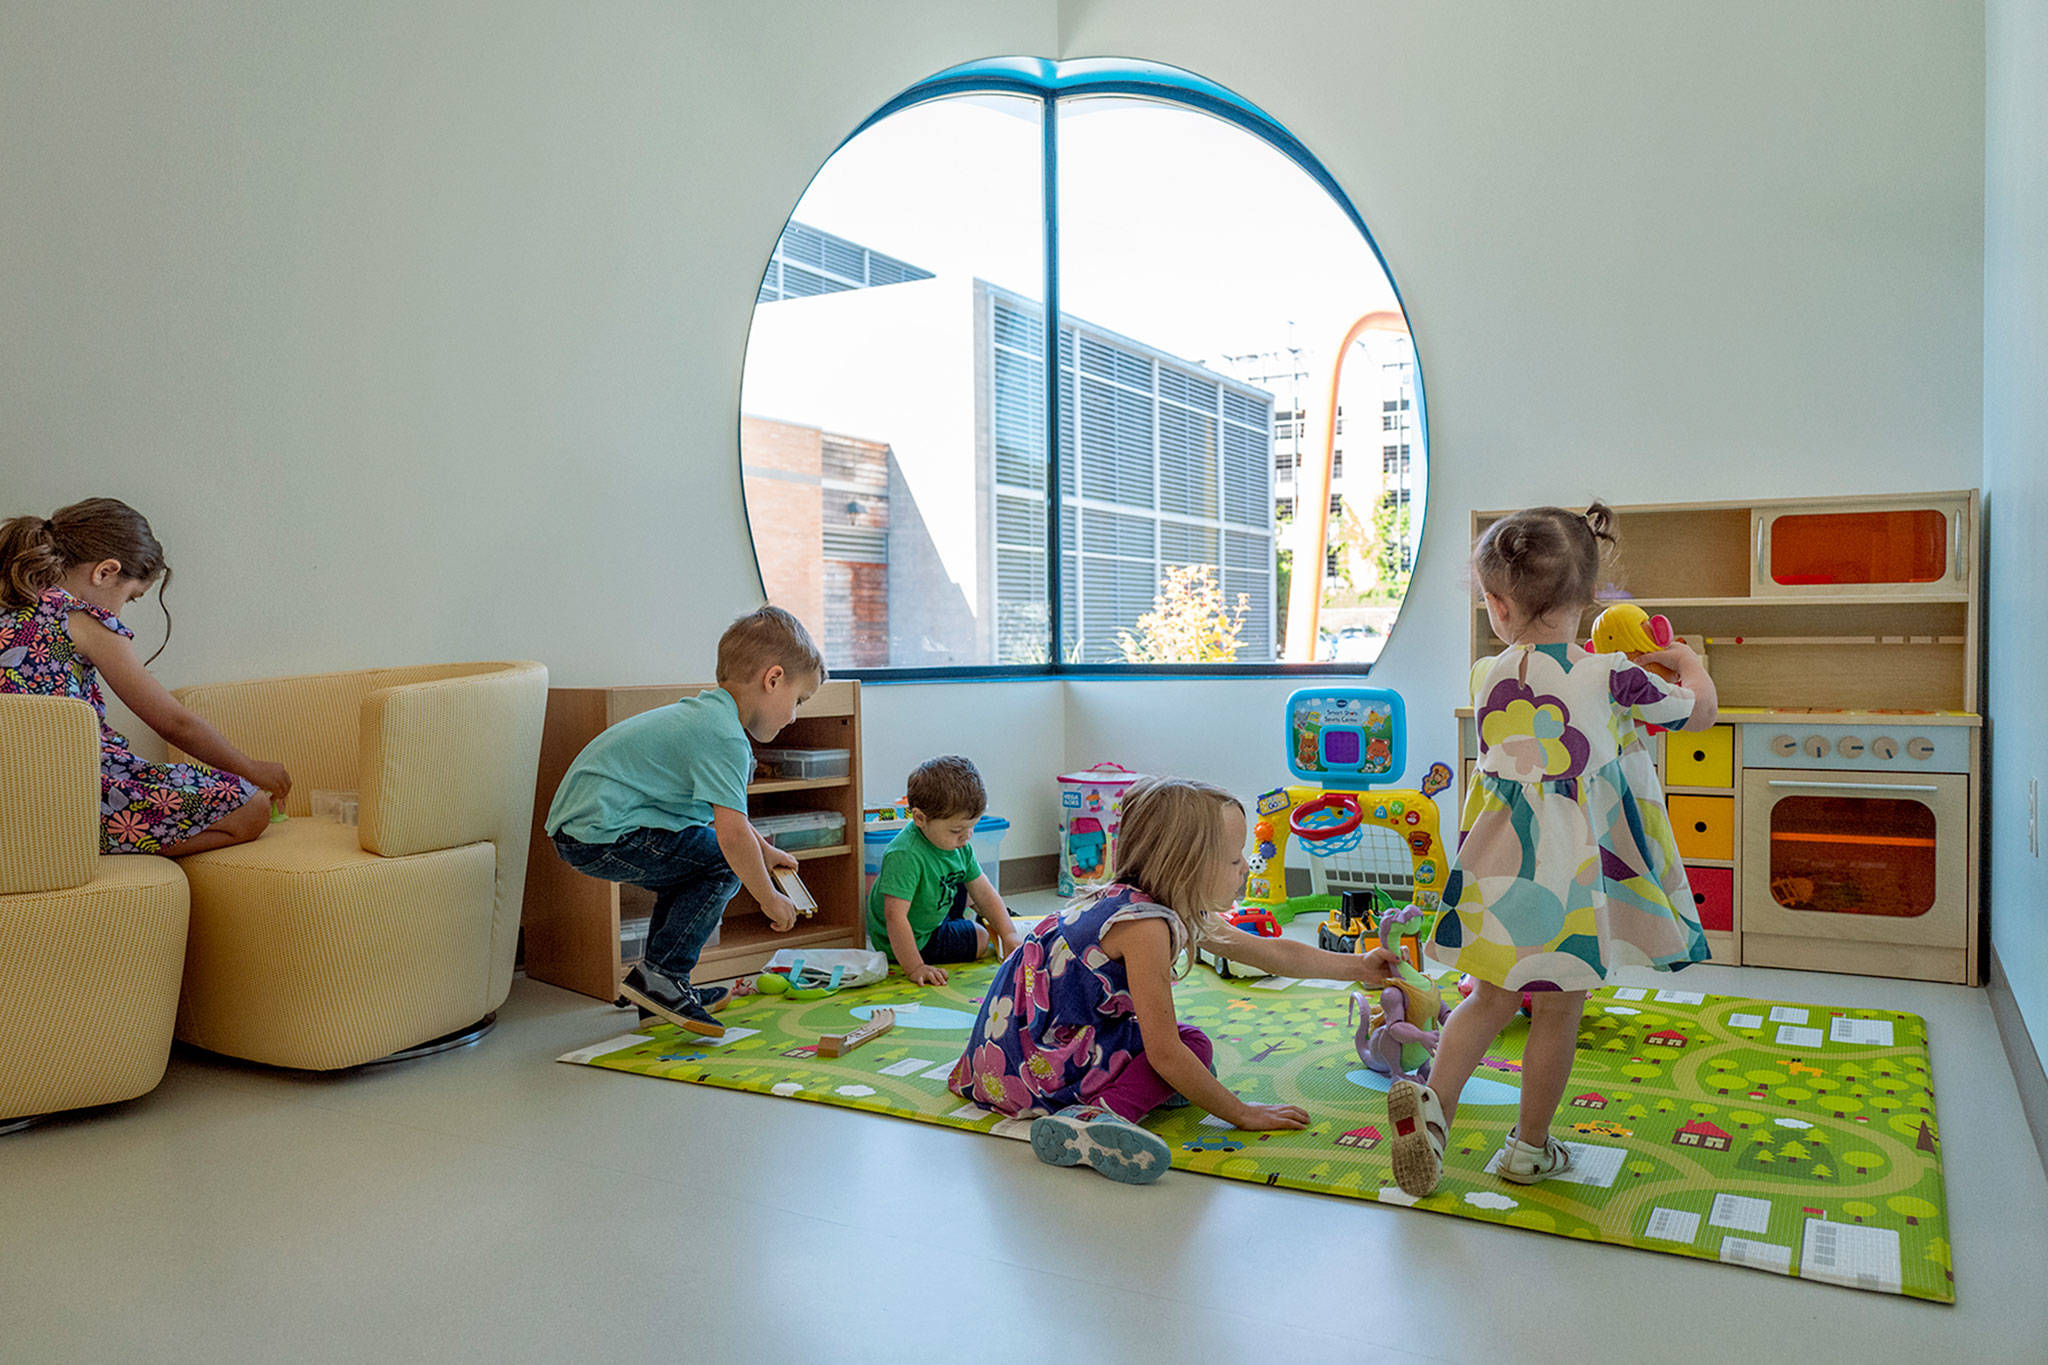 The new Seattle Childrens location in Everett features a play room and a gym. (Seattle Childrens)